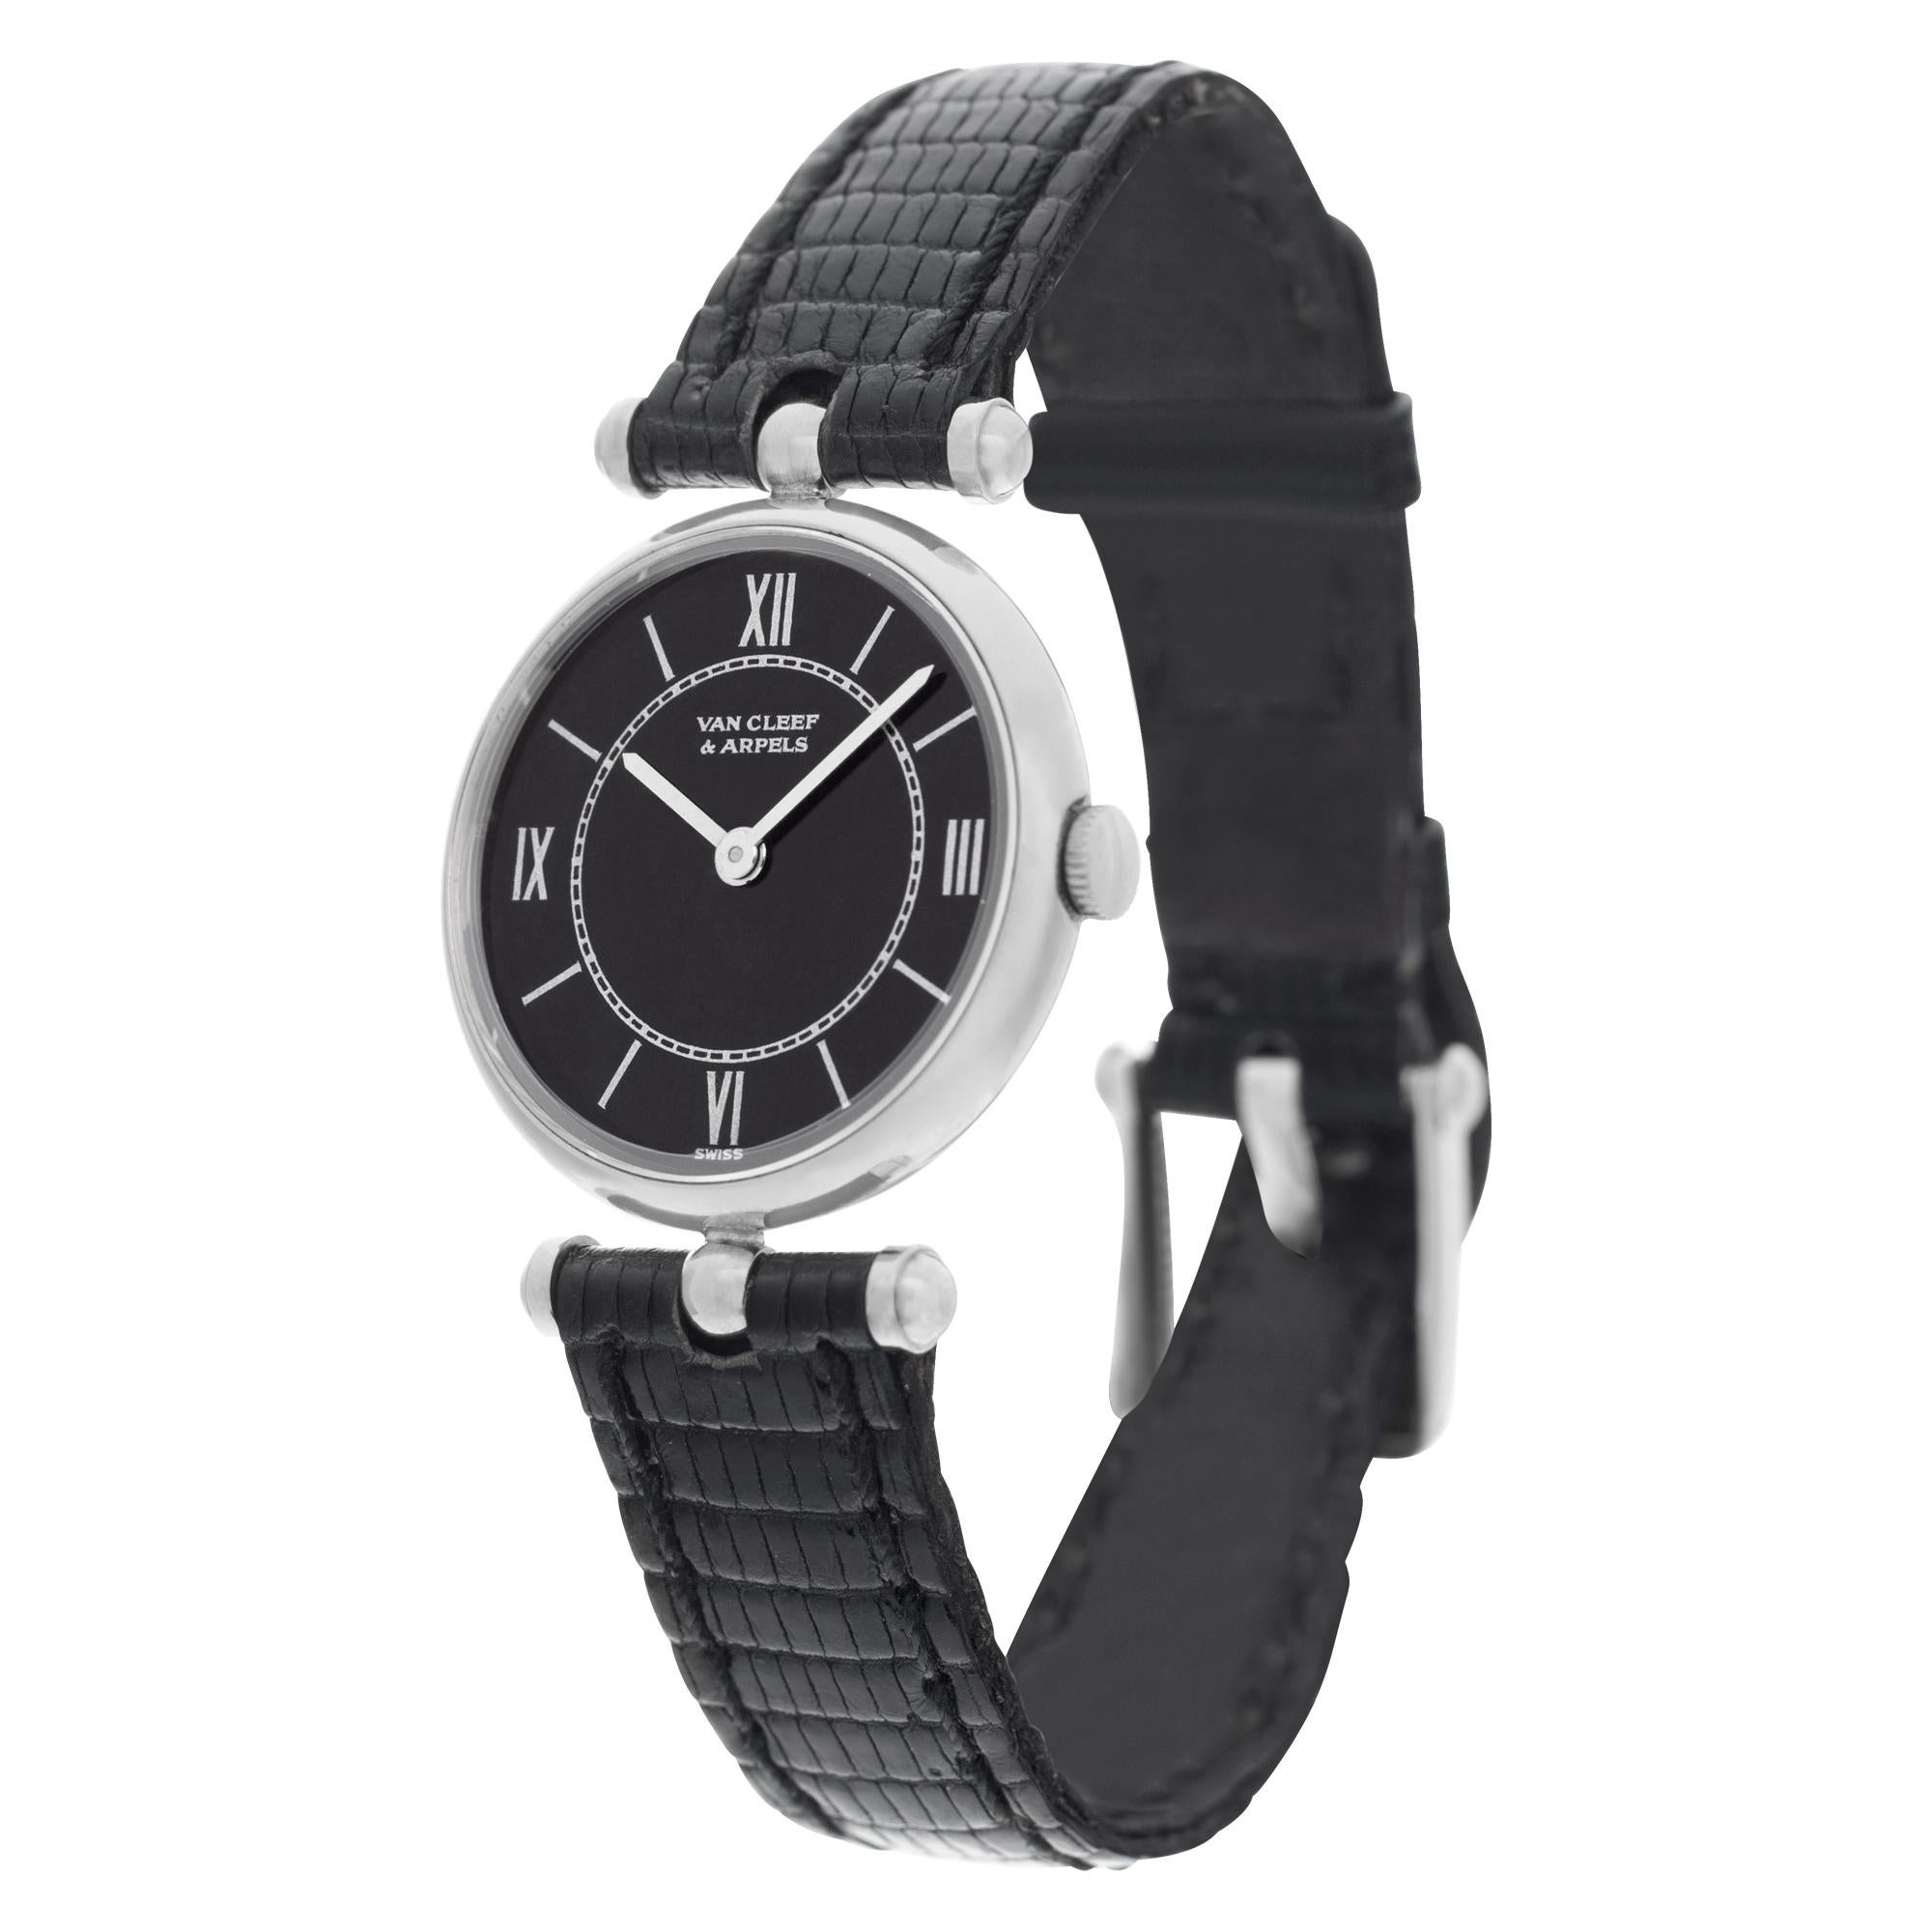 Van Cleef & Arpels Classic in 18k white gold on a black lizard strap with 18k white gold tang buckle. Manual wind.. 24 mm case size. Comes with original VCA pouch. Ref 31601. Circa 1990s. Fine Pre-owned Van Cleef & Arpels Watch.

Certified preowned